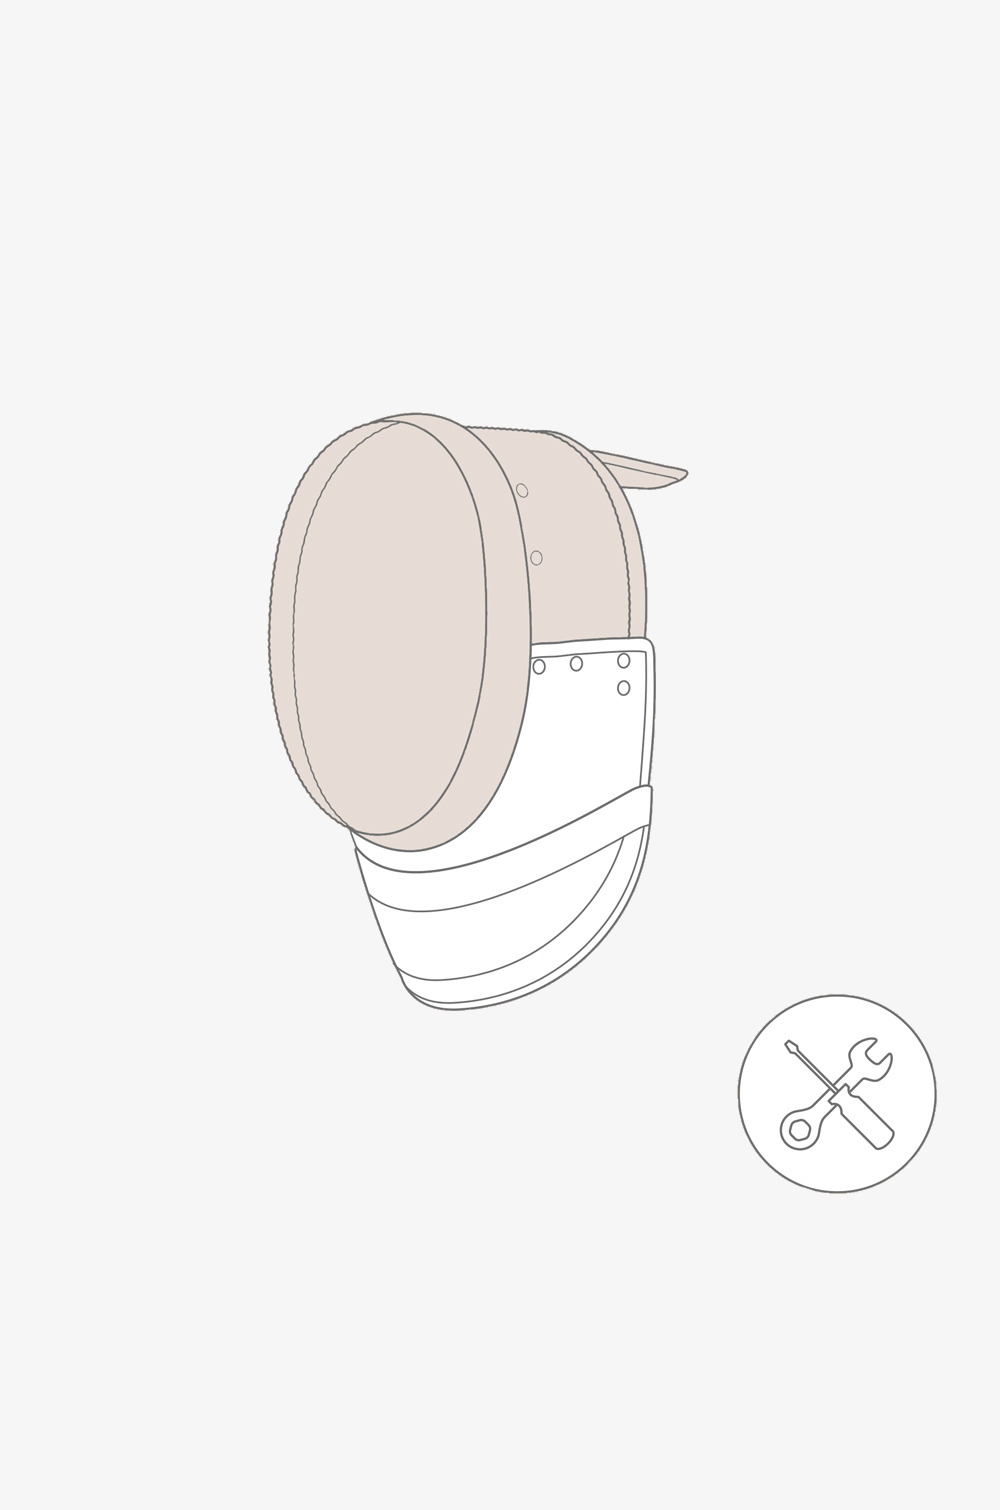 Replacement of the Bib Foil Mask 350N